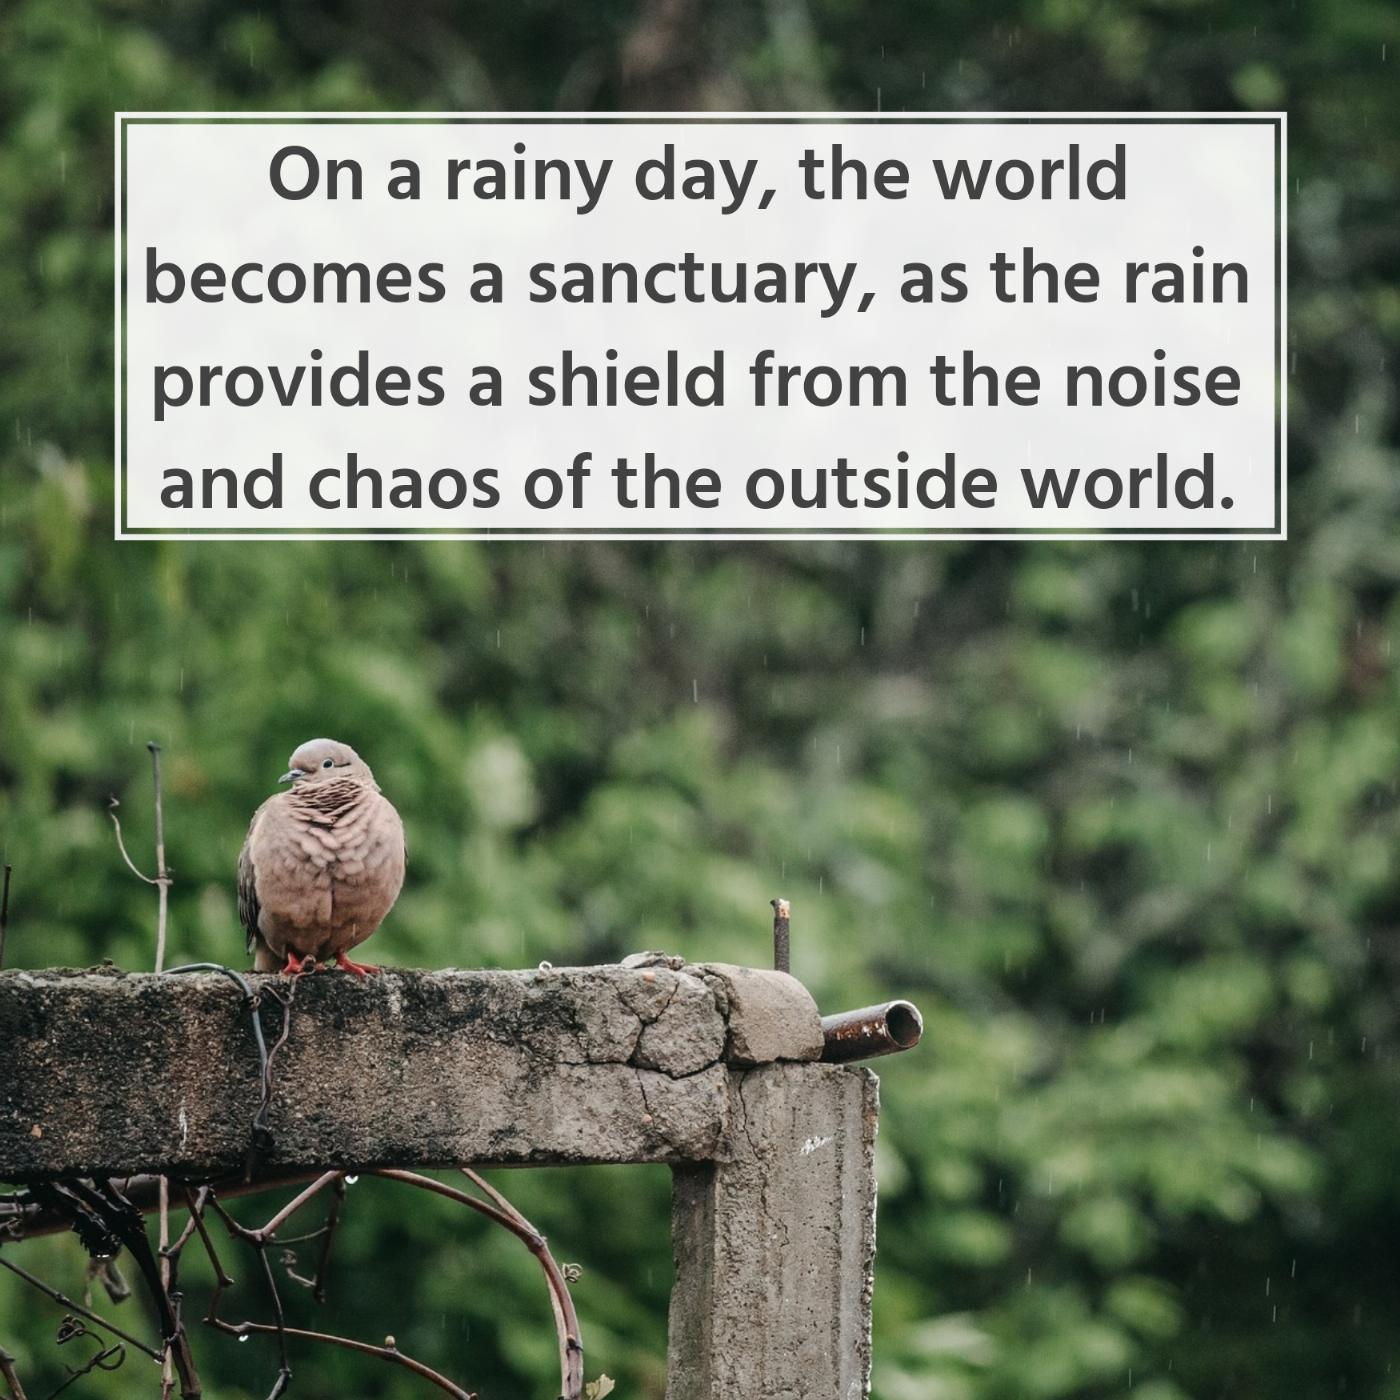 On a rainy day the world becomes a sanctuary